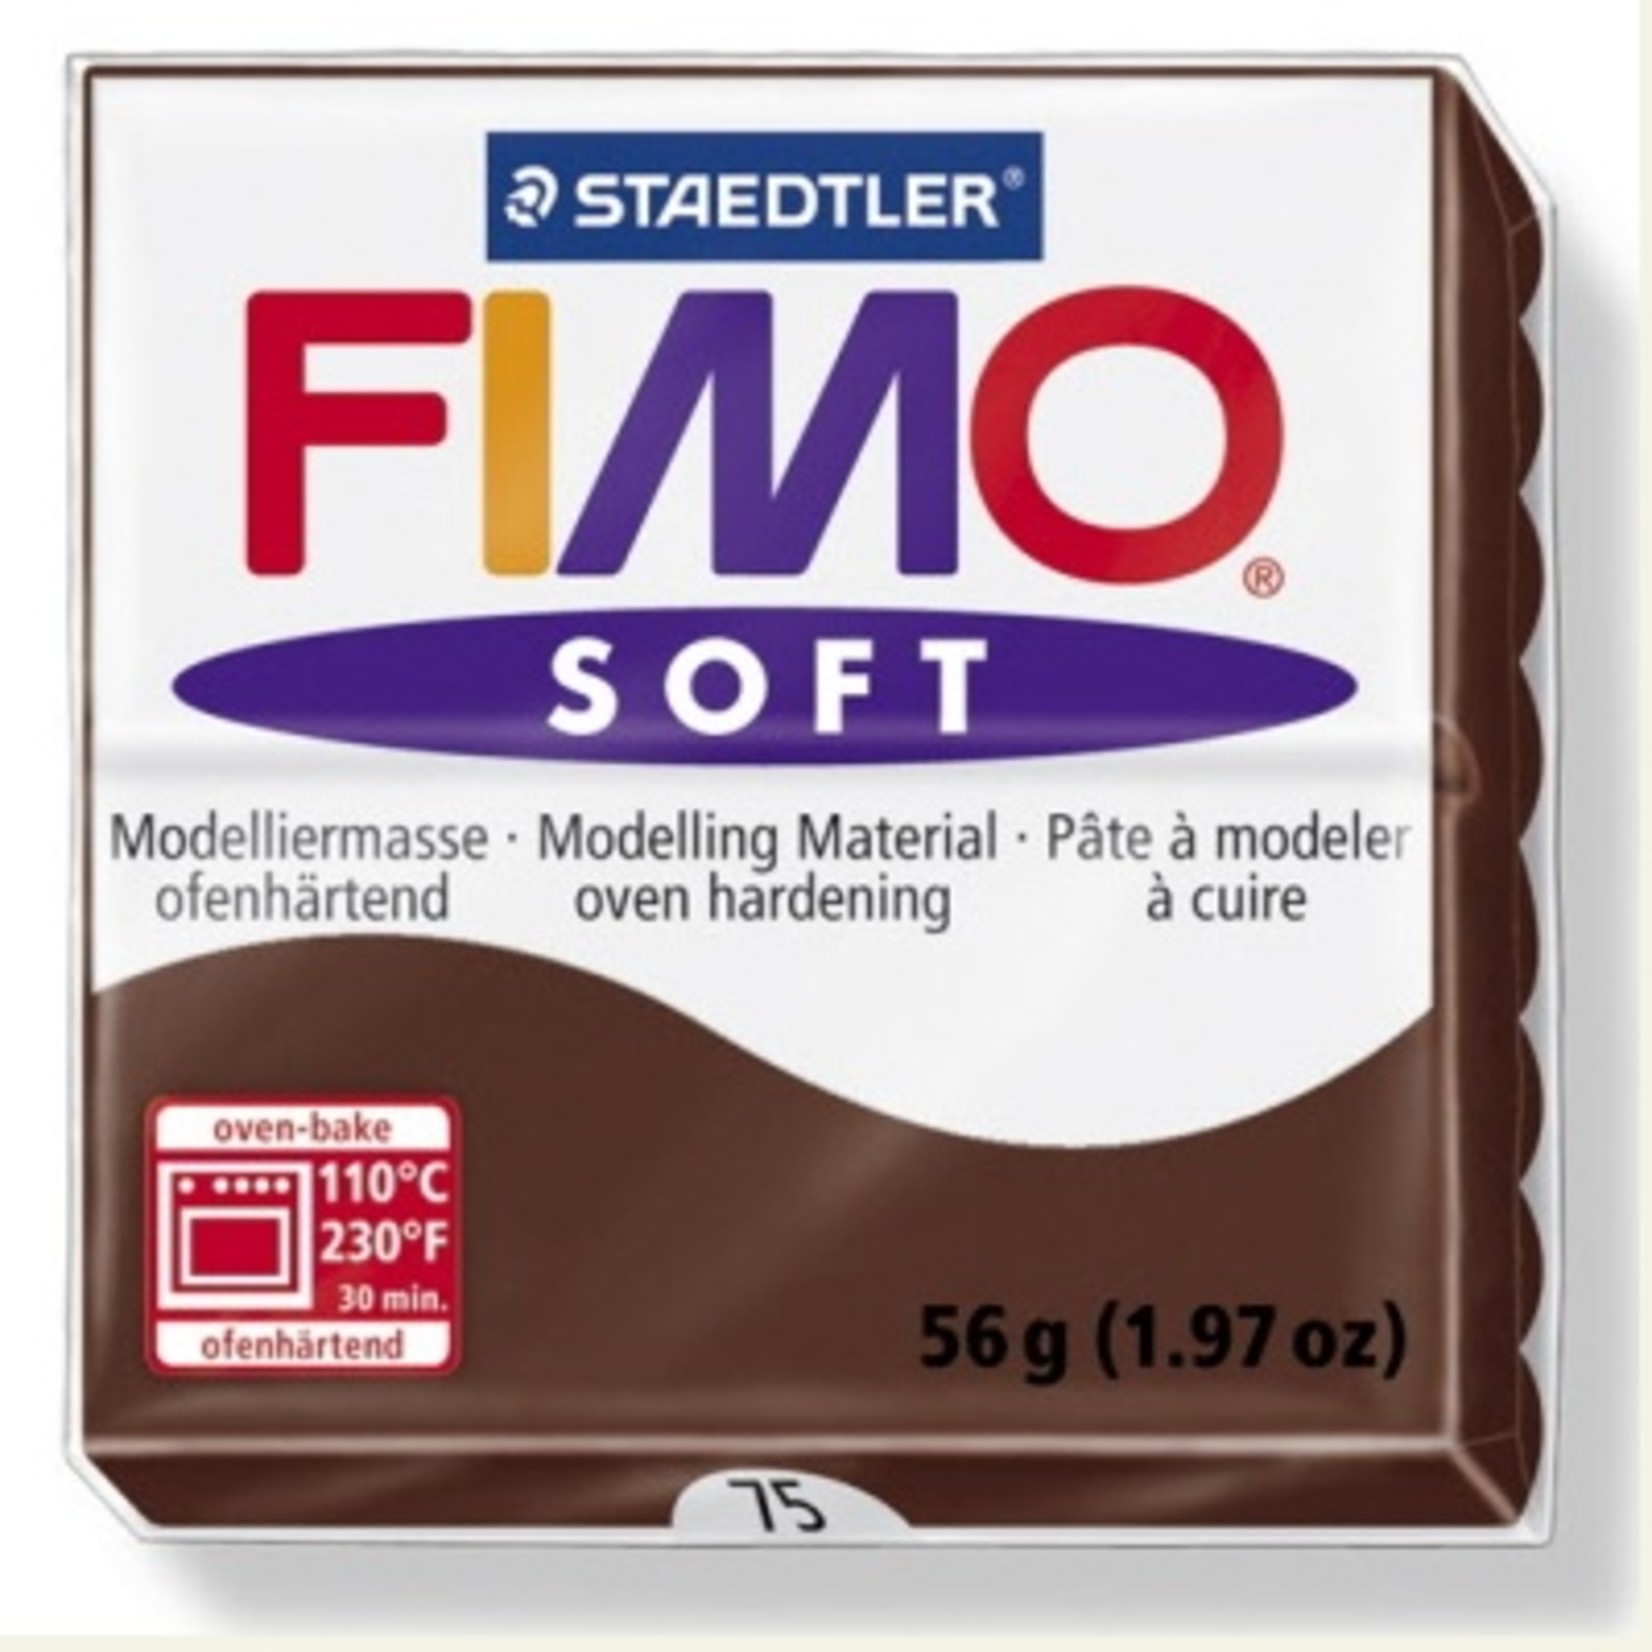 STAEDTLER FIMO SOFT OVEN BAKE CLAY 75 CHOCOLATE 57G